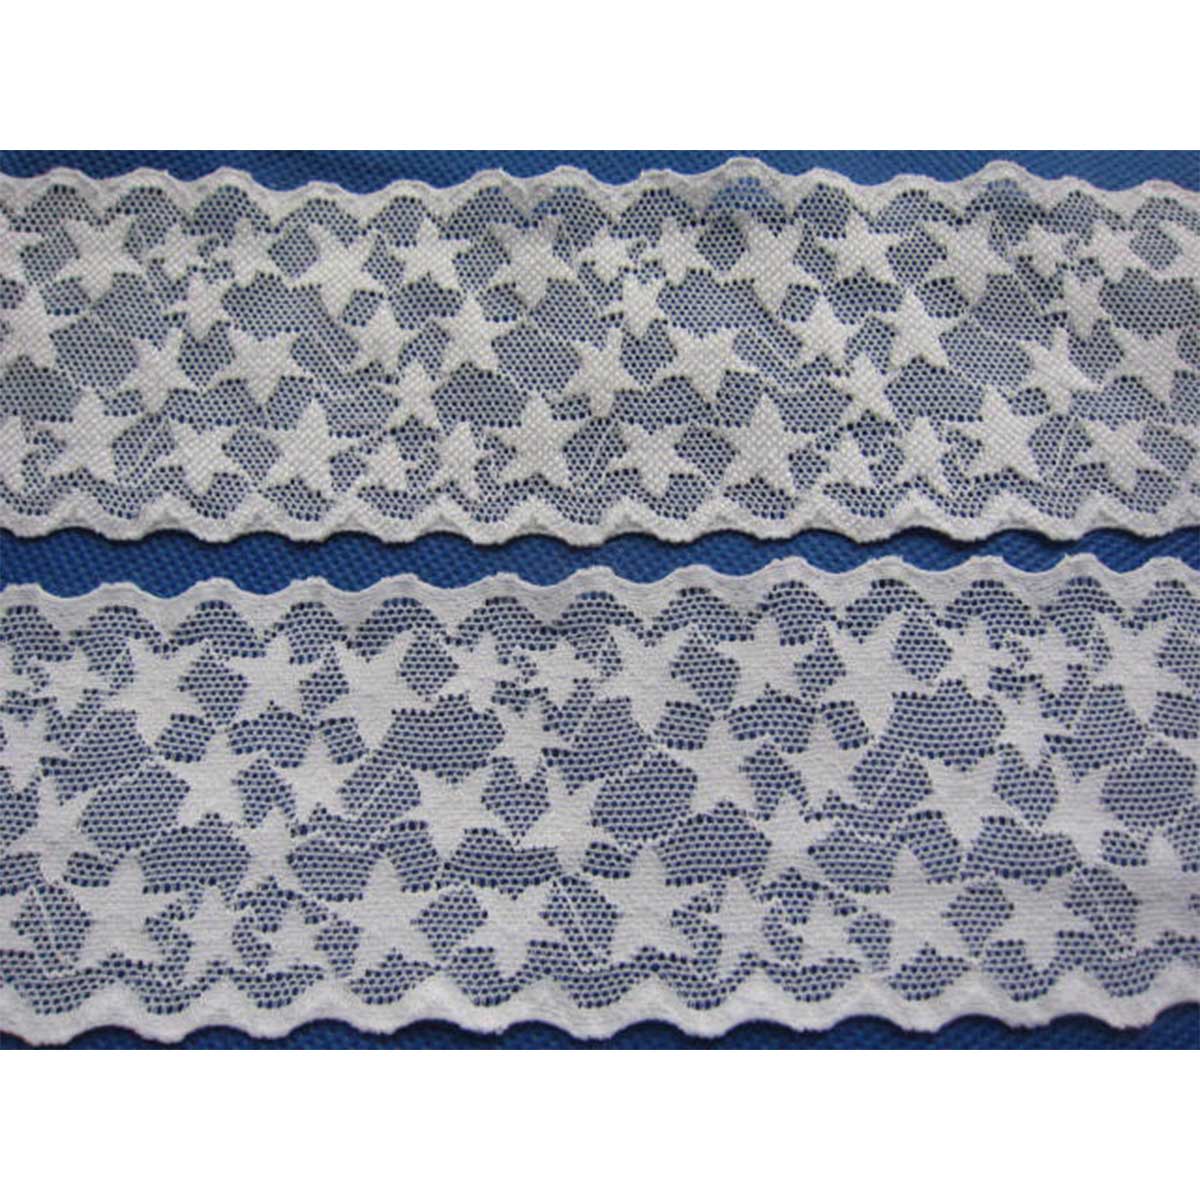 10 Yards Elastic Lace Star Lace Trim 2.25″-White